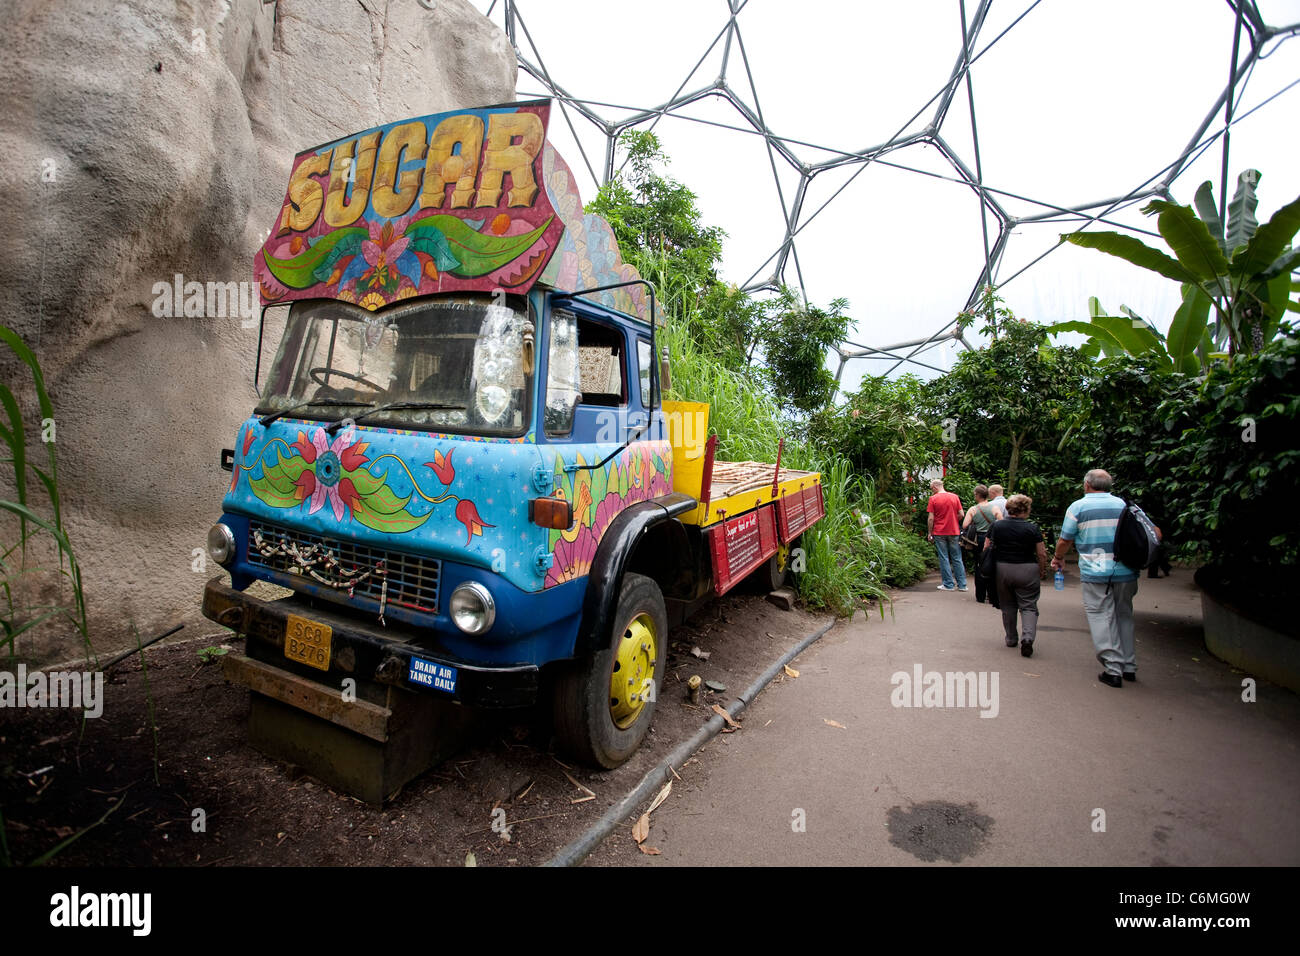 Sugar Truck inside the Rainforest Area in The Tropical Biome the Eden Project. Photo:Jeff Gilbert Stock Photo